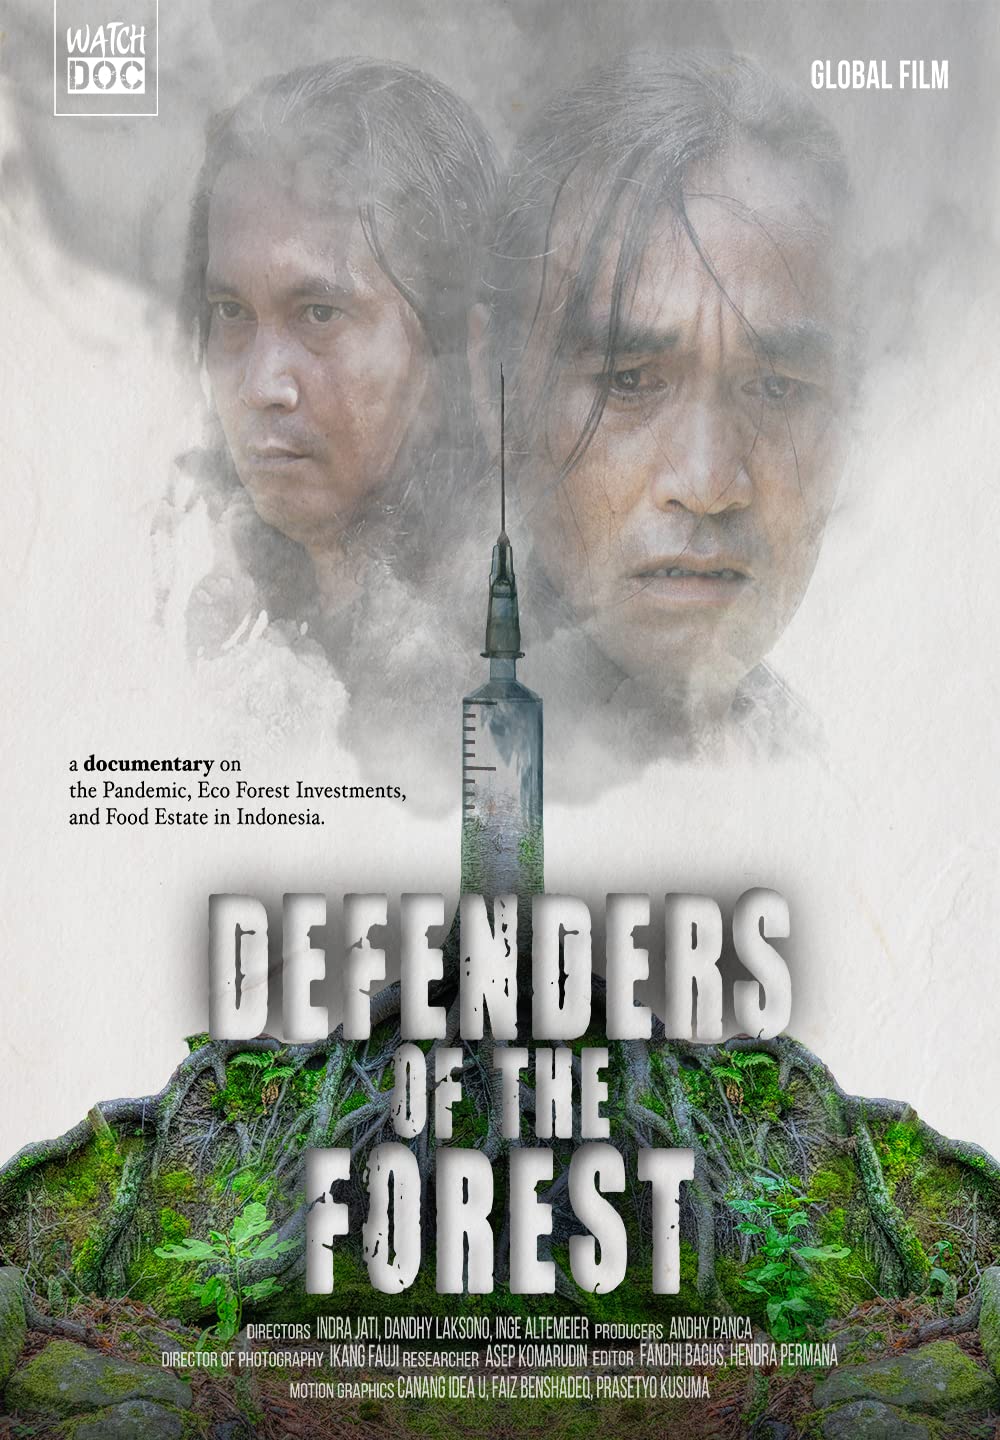     Defenders of the Forest